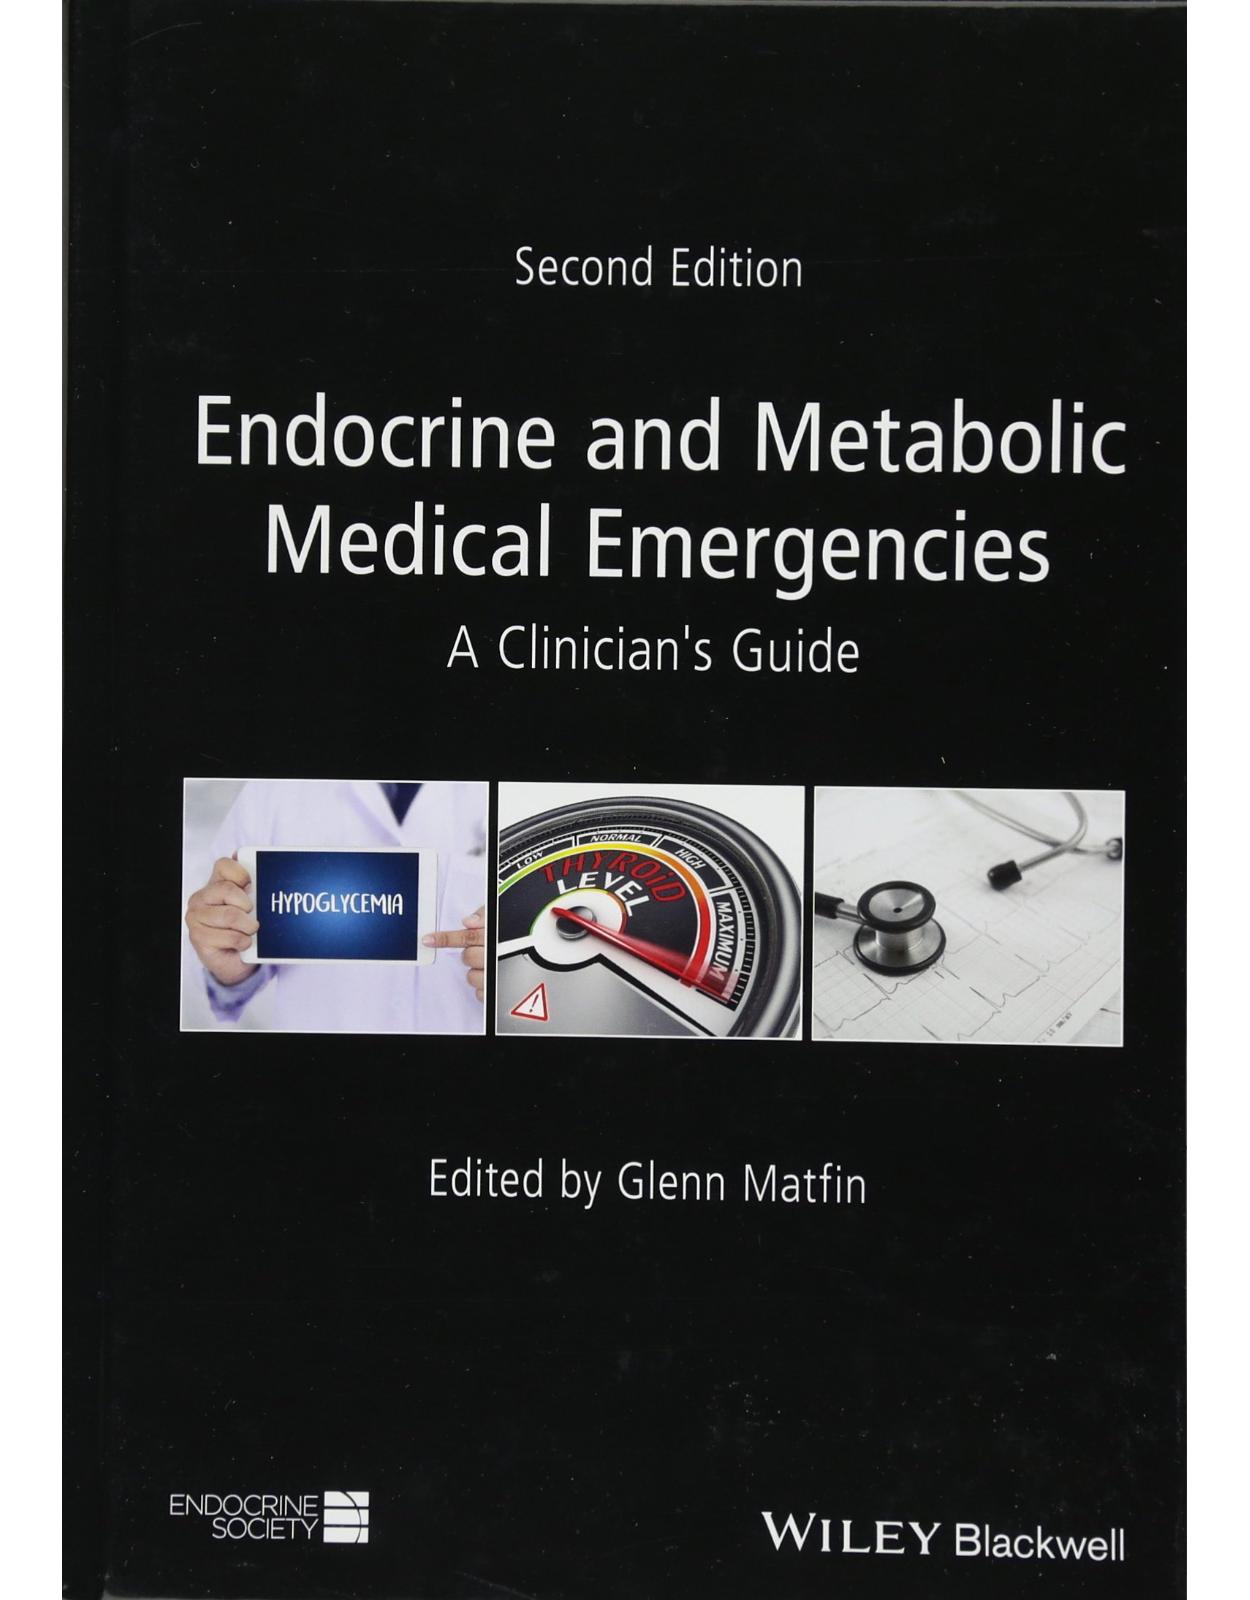 Endocrine and Metabolic Medical Emergencies: A Clinician’s Guide 